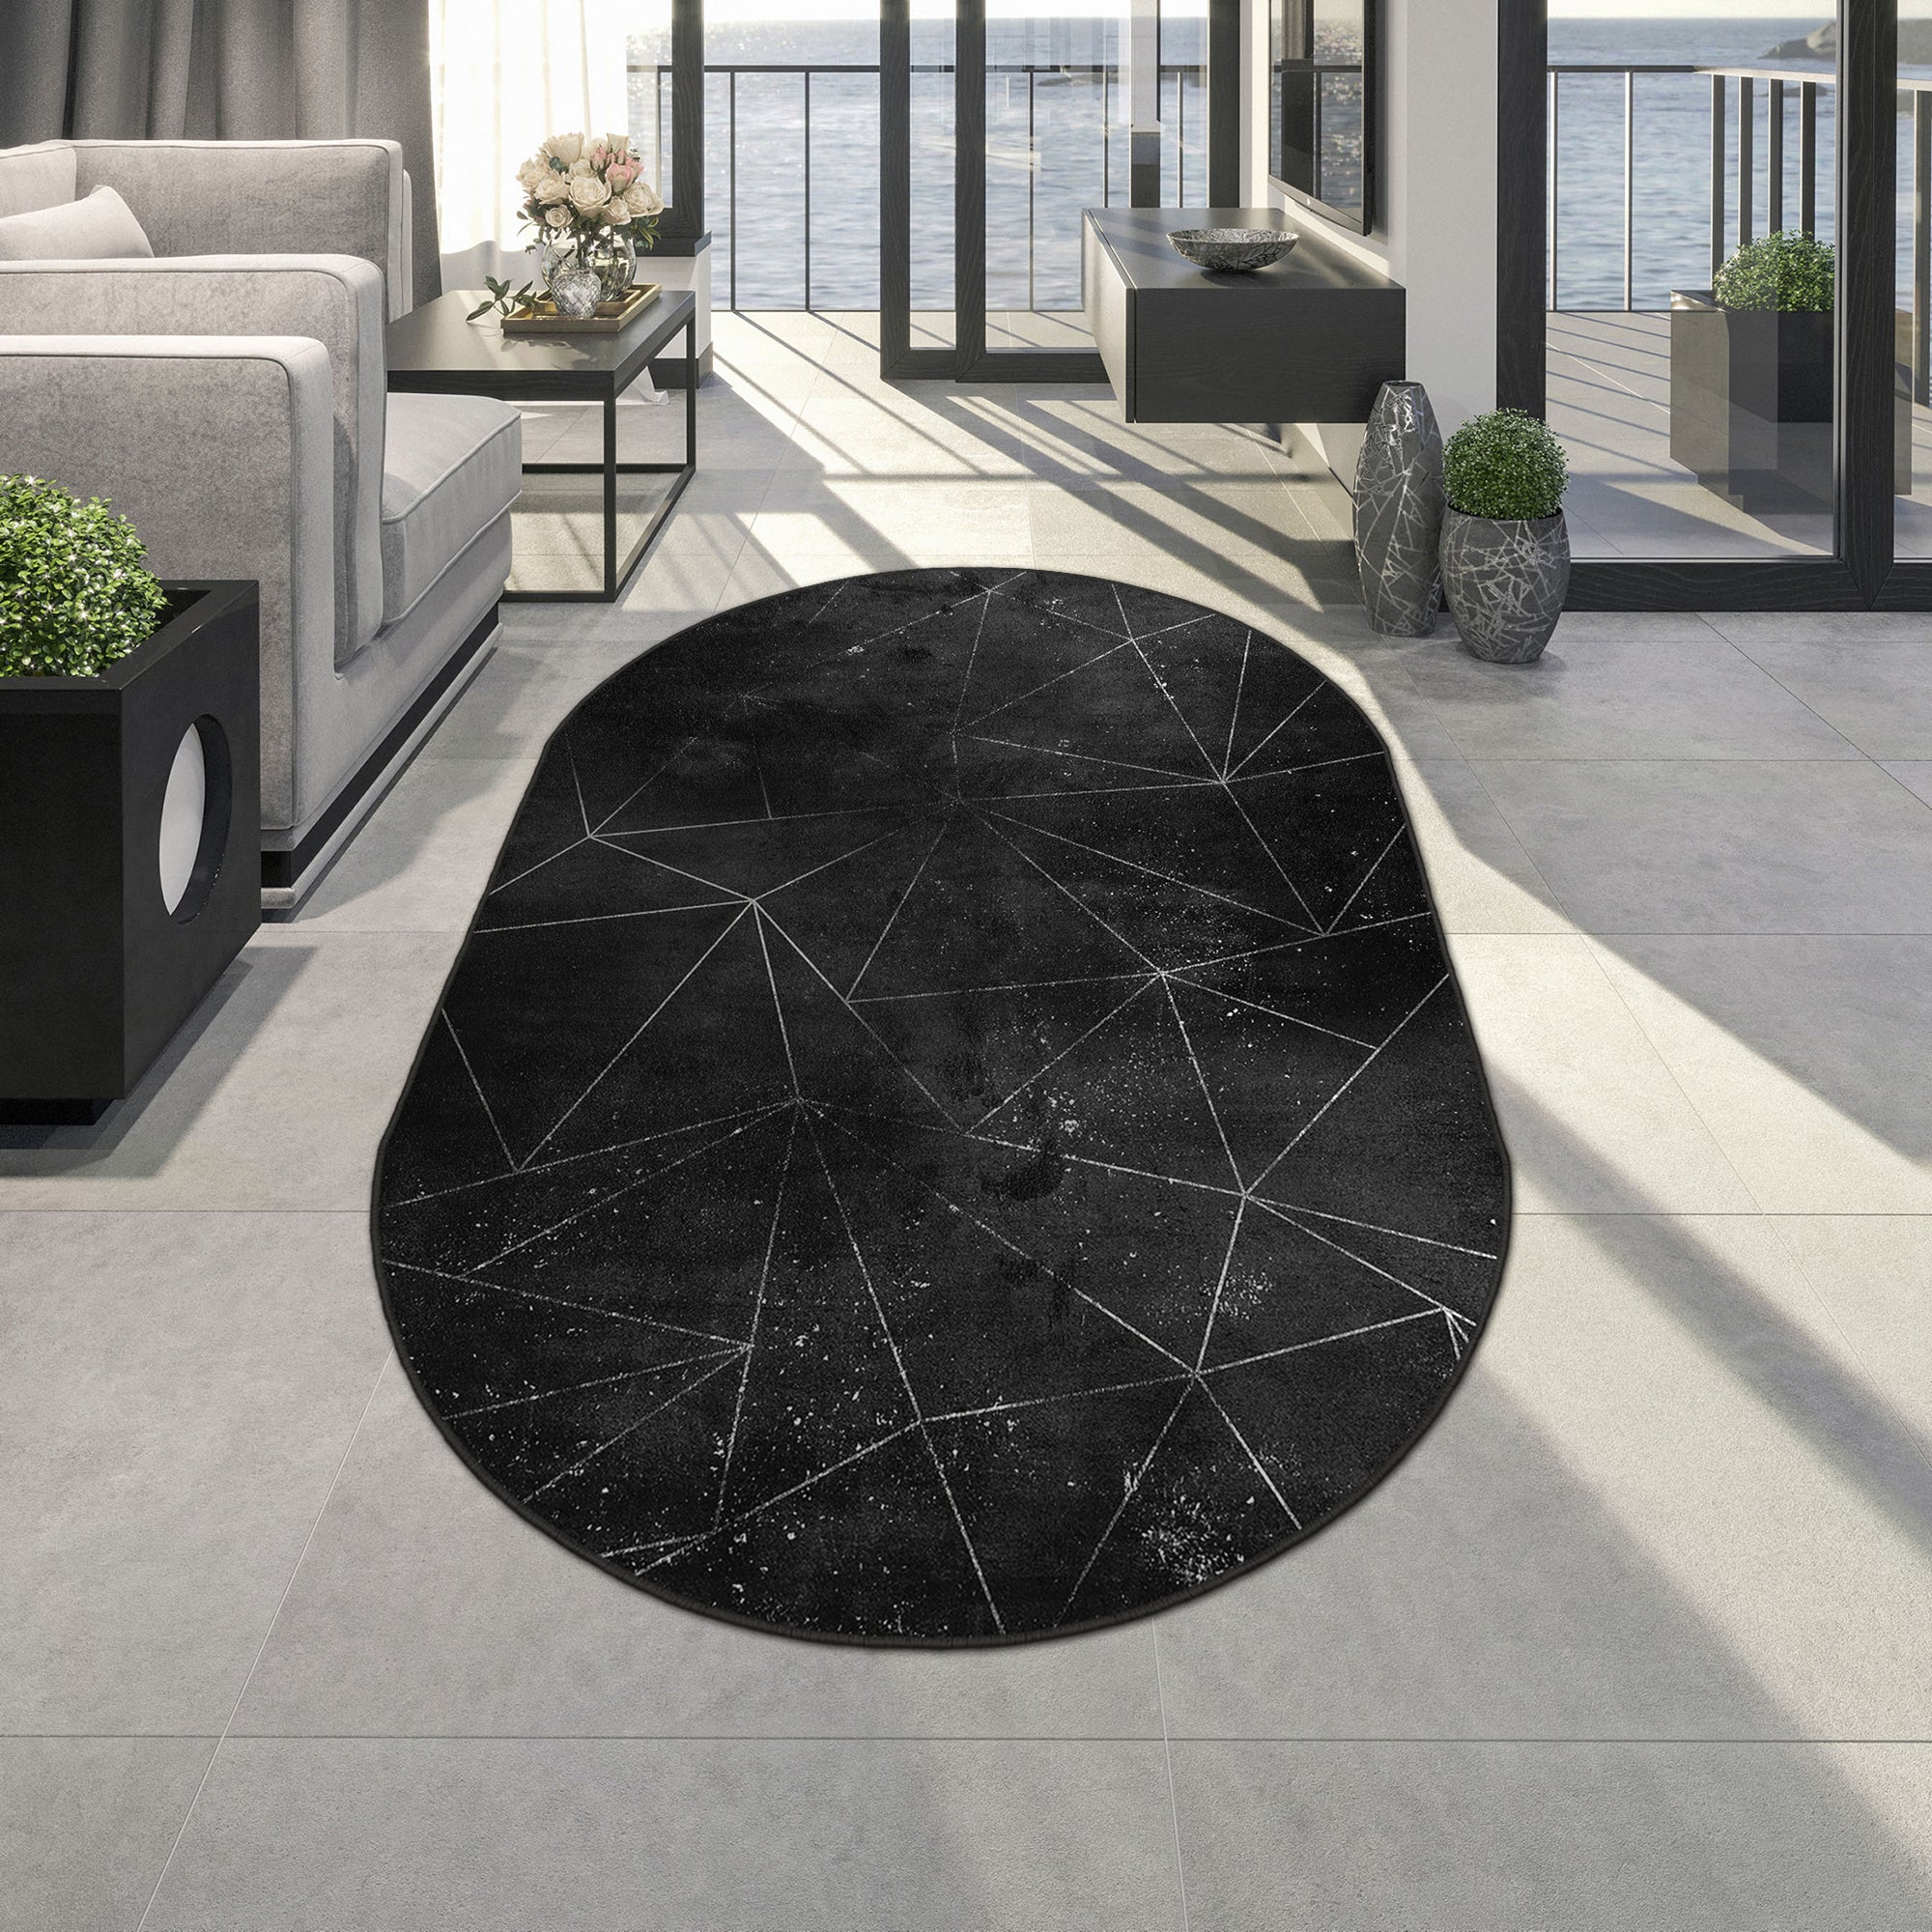 Washable Area Rugs,Black,Oval,Rug with Non Slip Backing, Stain Resistant, Foldable, Boho Machine Washable Carpet Mat for Kitchen, Bathroom, Bedroom or Living Room